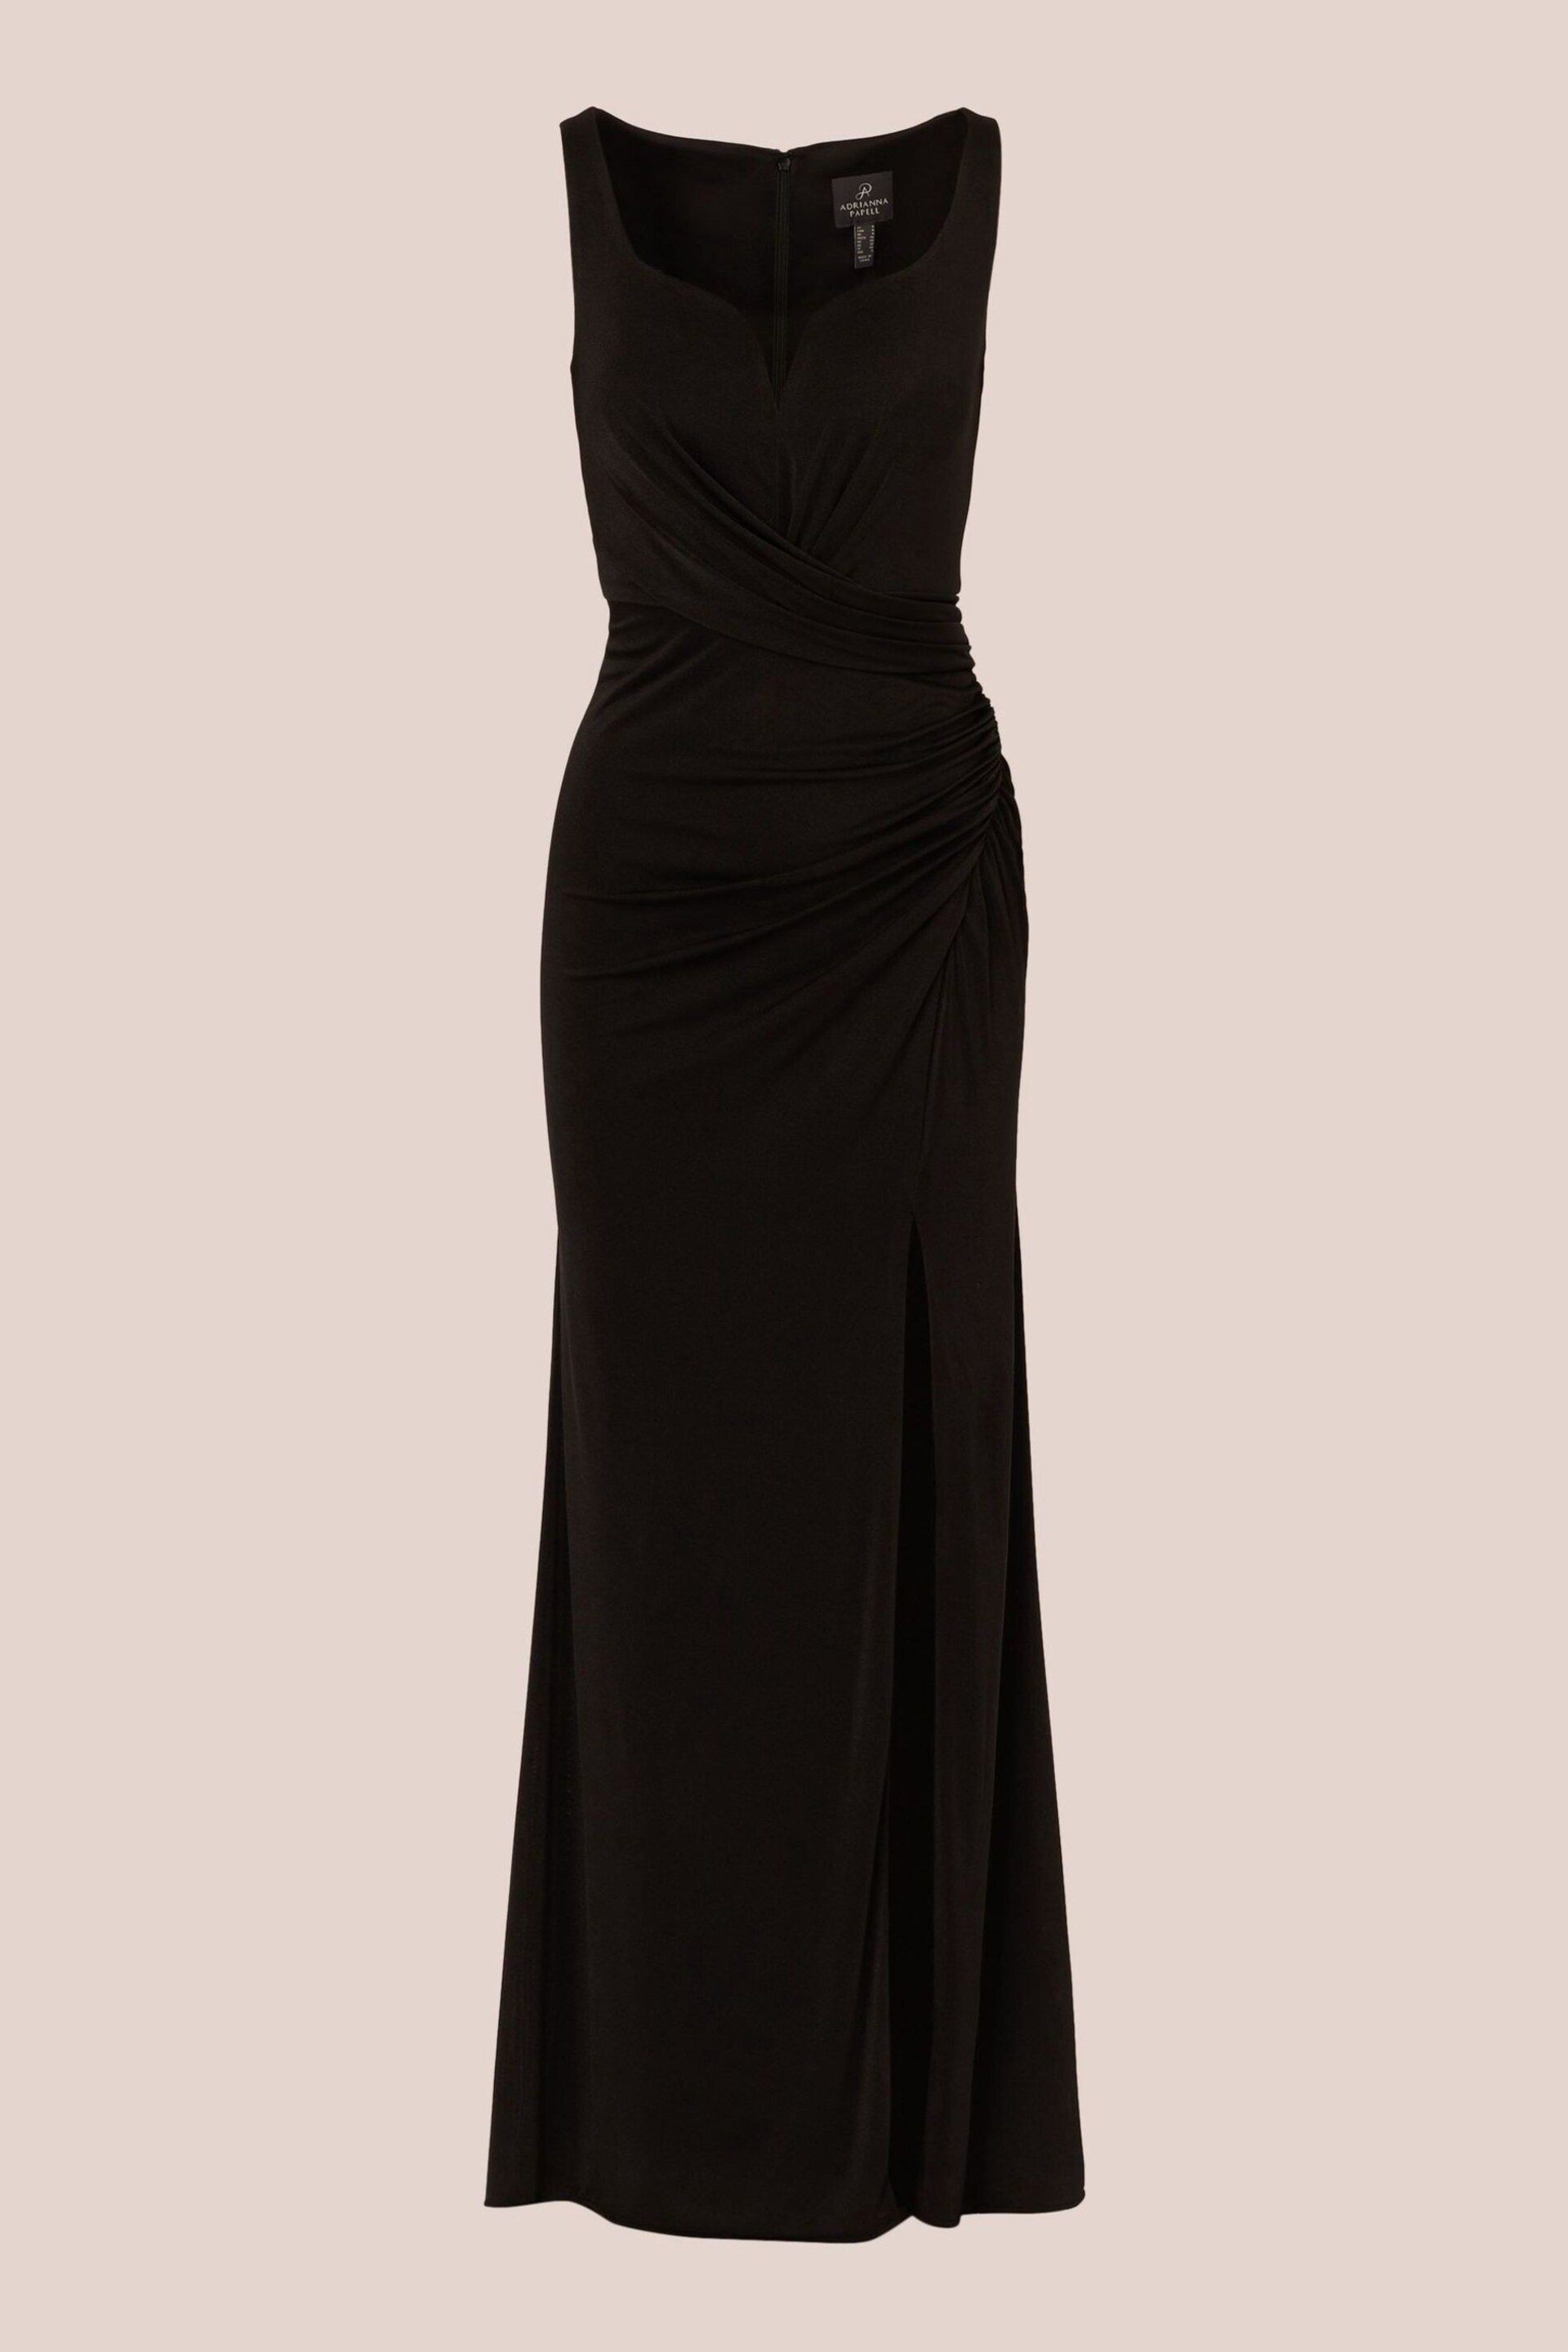 Adrianna Papell Novelty Knit Mermaid Black Gown - Image 6 of 7